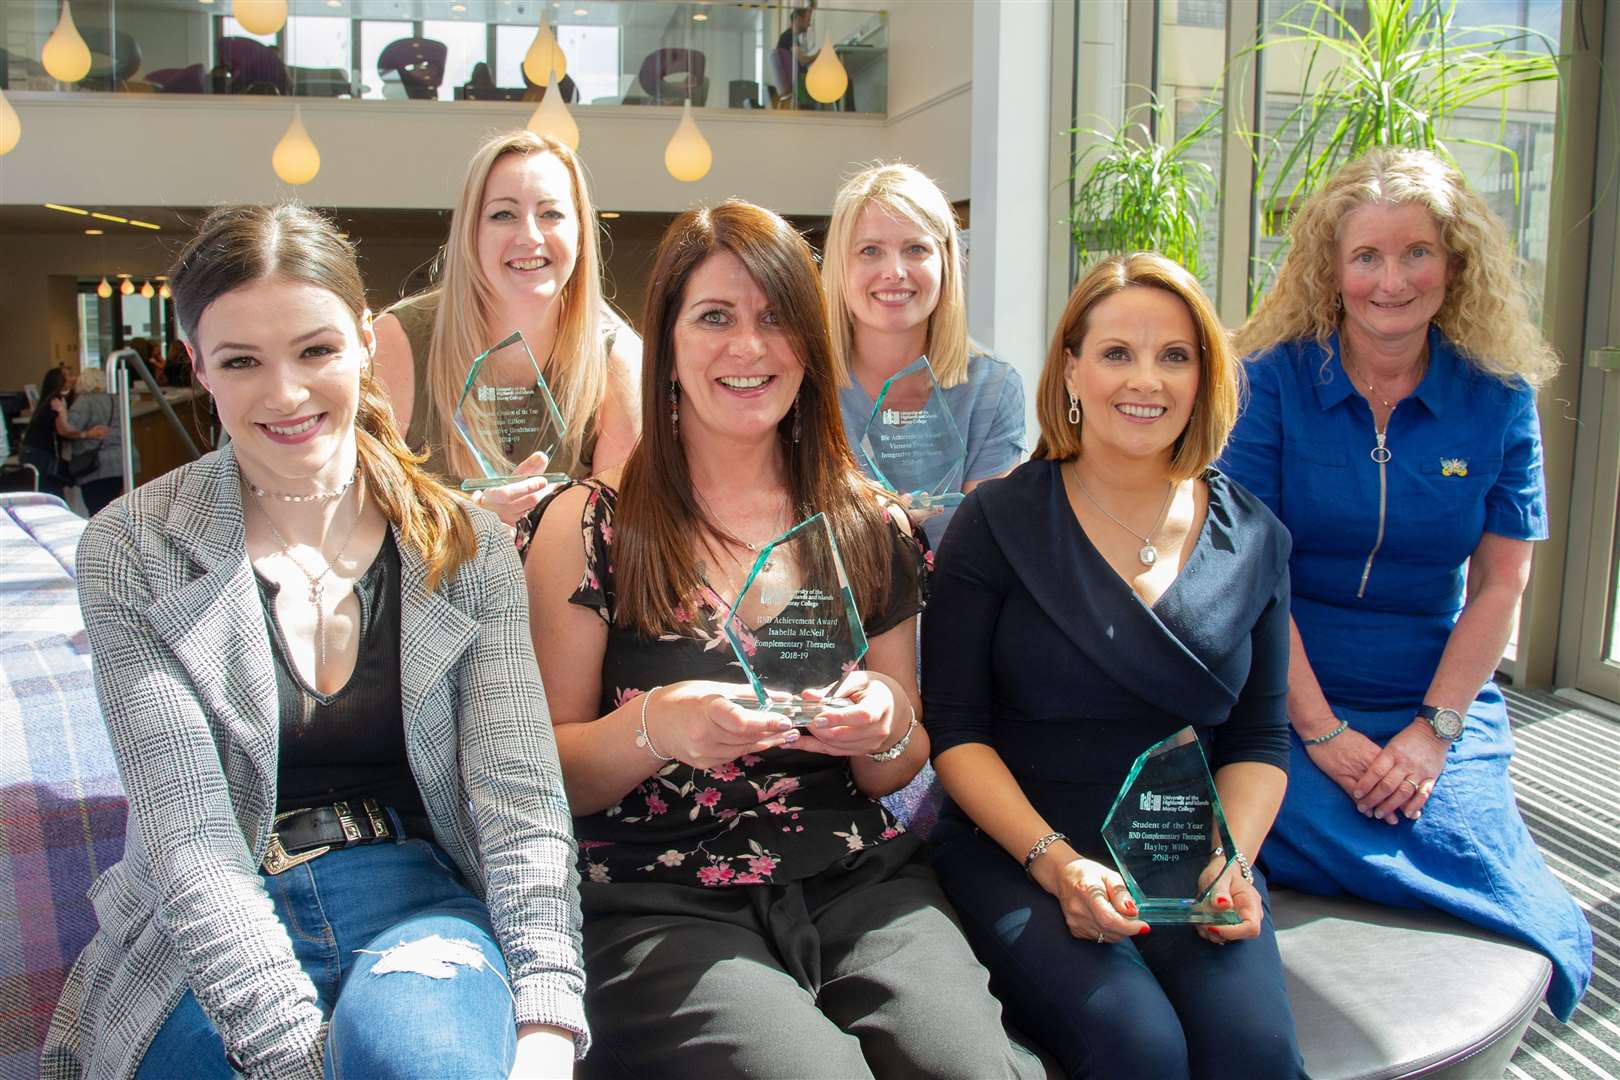 Rebecca Alexander, Teresa Elliott, Issy McNeill, Vicki Cranna, Hayley Wills, Elizabeth Boyall are either graduates in either HND Complementary Therapies Year 2 or BSc (hons) Integrative Healthcare.